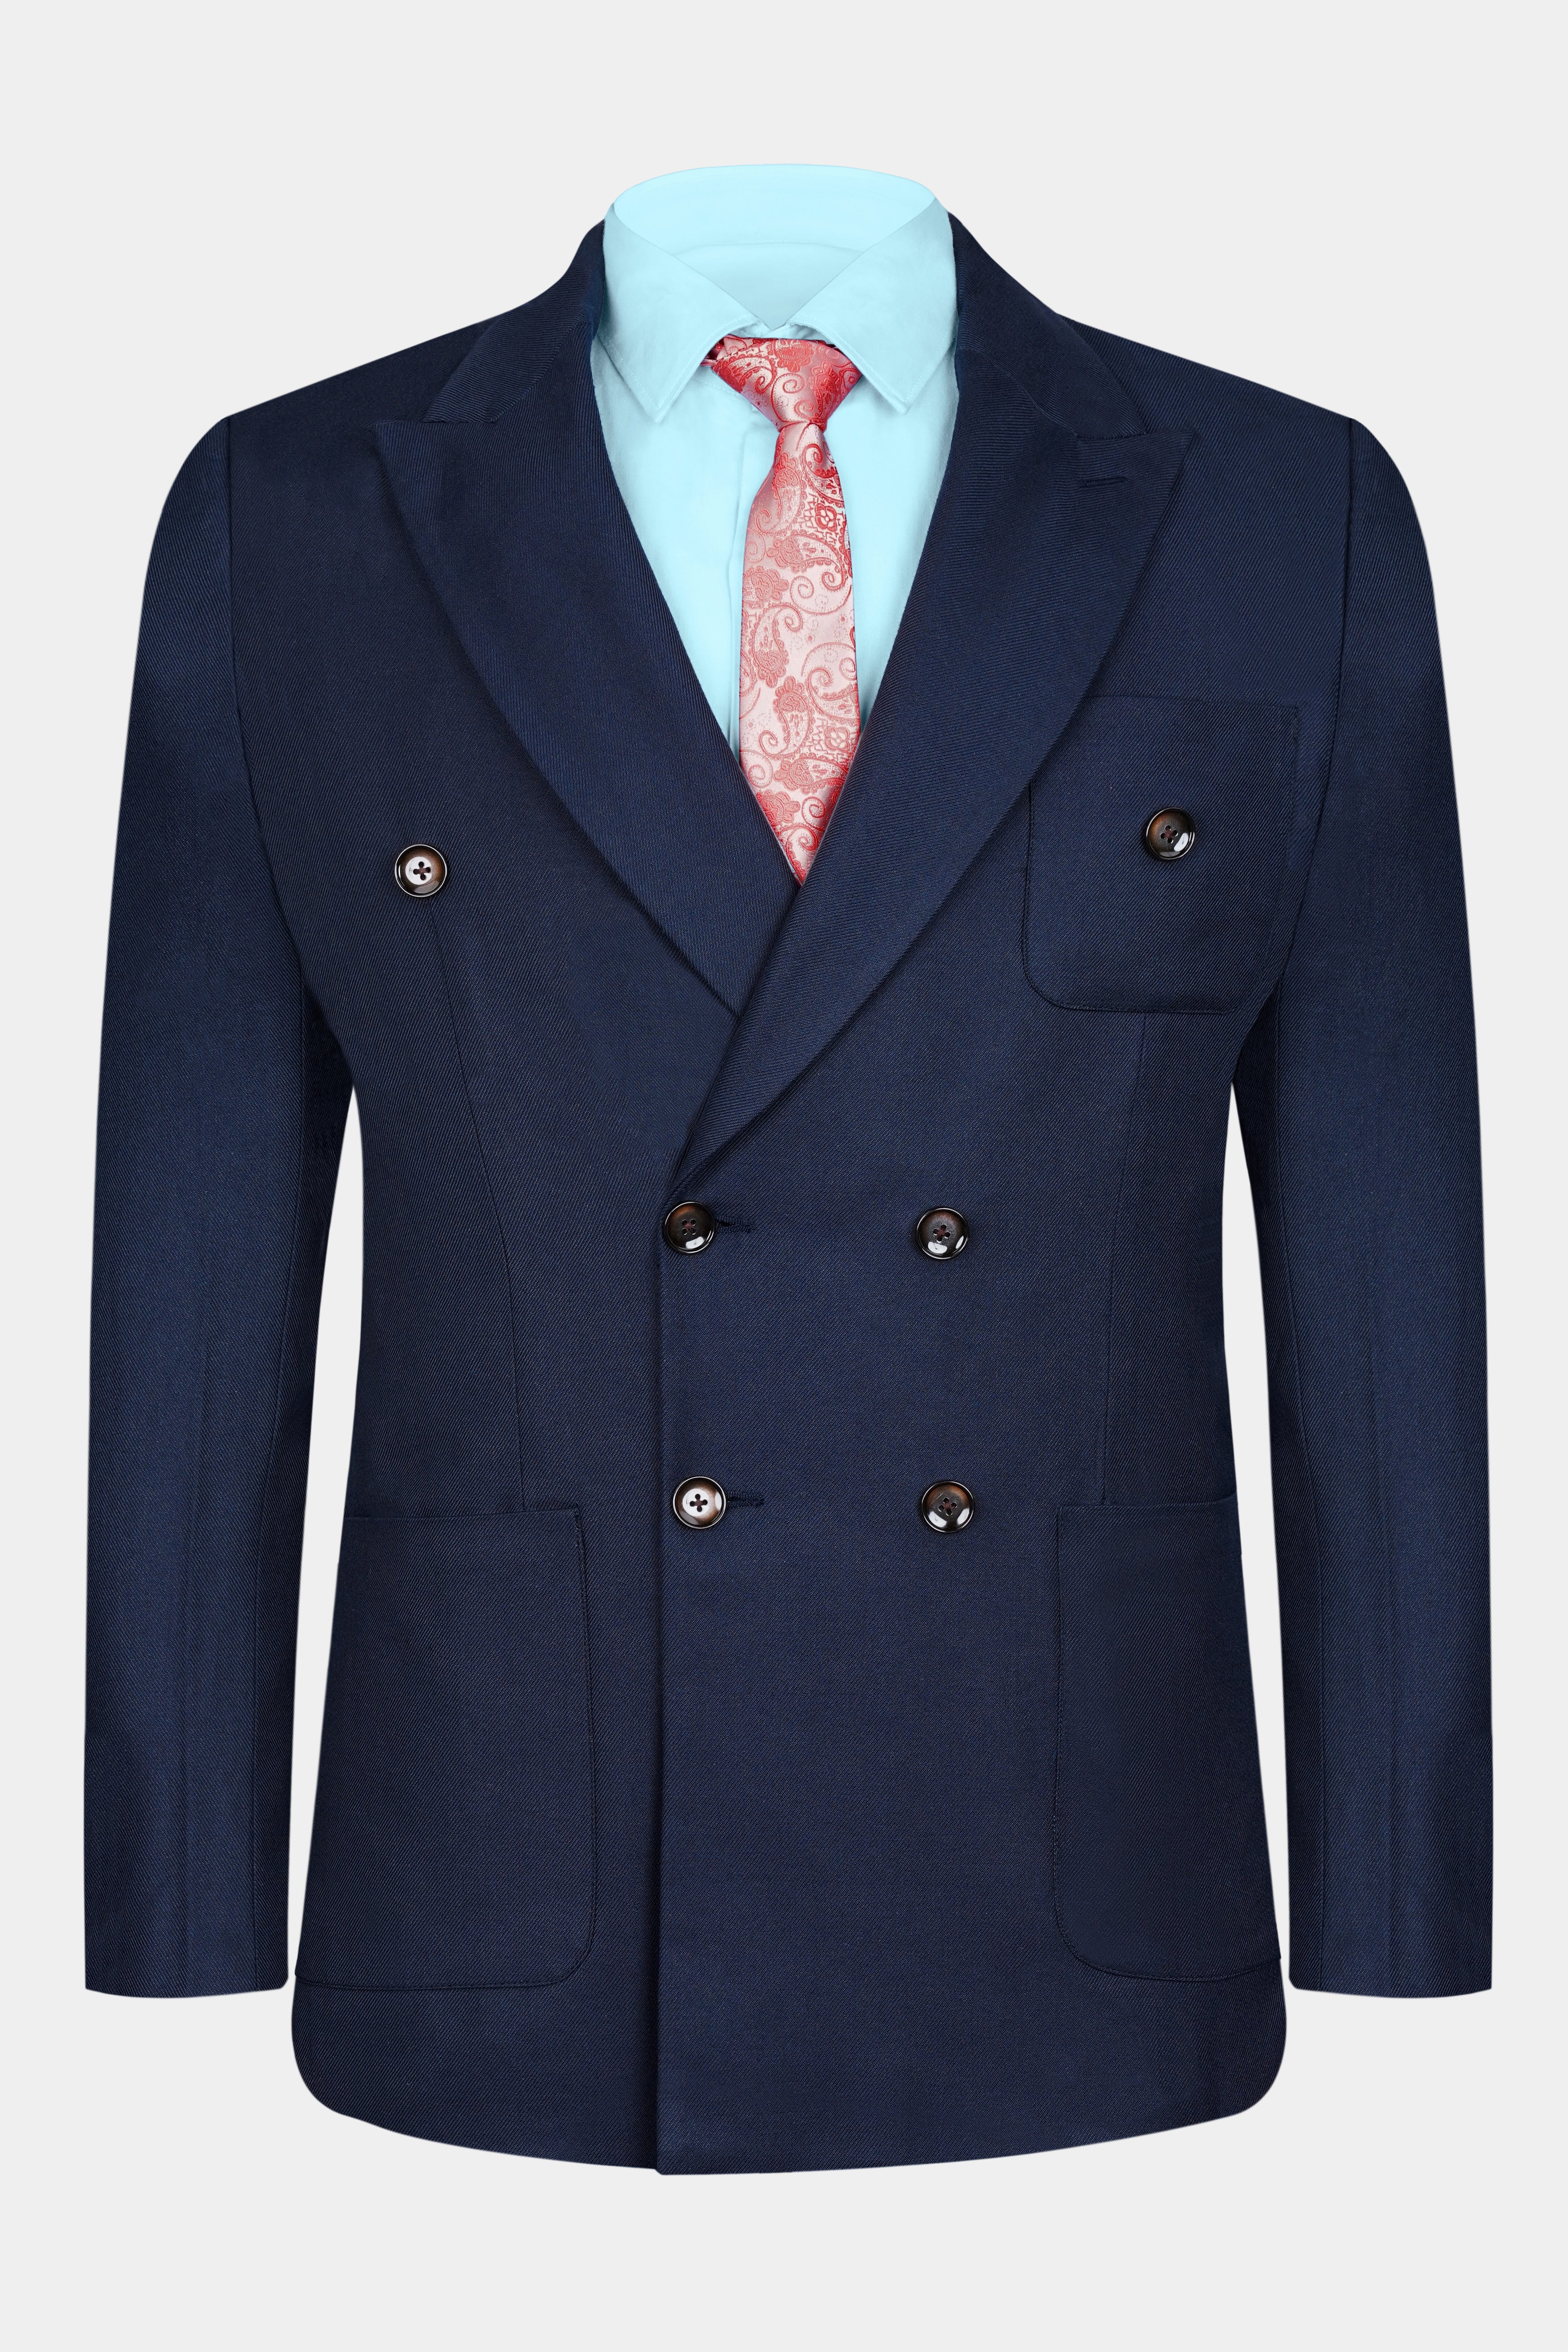 Haiti Blue Wool Rich Double Breasted Sports Blazer BL3089-DB-PP-36, BL3089-DB-PP-38, BL3089-DB-PP-40, BL3089-DB-PP-42, BL3089-DB-PP-44, BL3089-DB-PP-46, BL3089-DB-PP-48, BL3089-DB-PP-50, BL3089-DB-PP-52, BL3089-DB-PP-54, BL3089-DB-PP-56, BL3089-DB-PP-58, BL3089-DB-PP-60